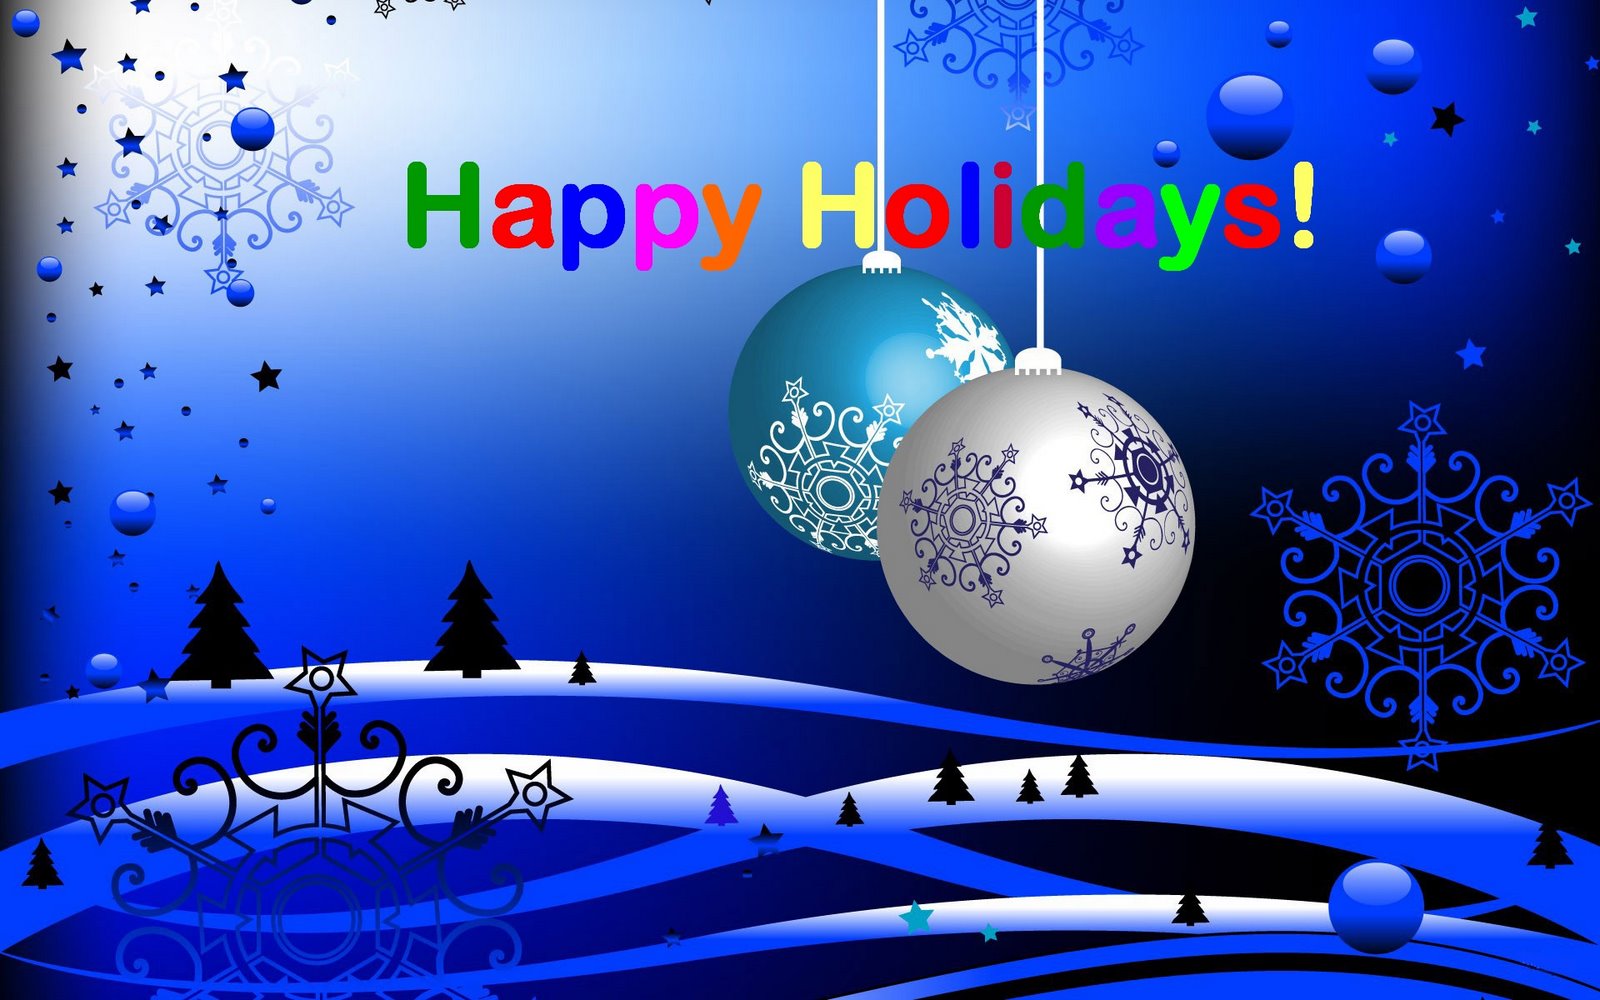 Happy Holidays Quotes Messages And Wishes - Internet